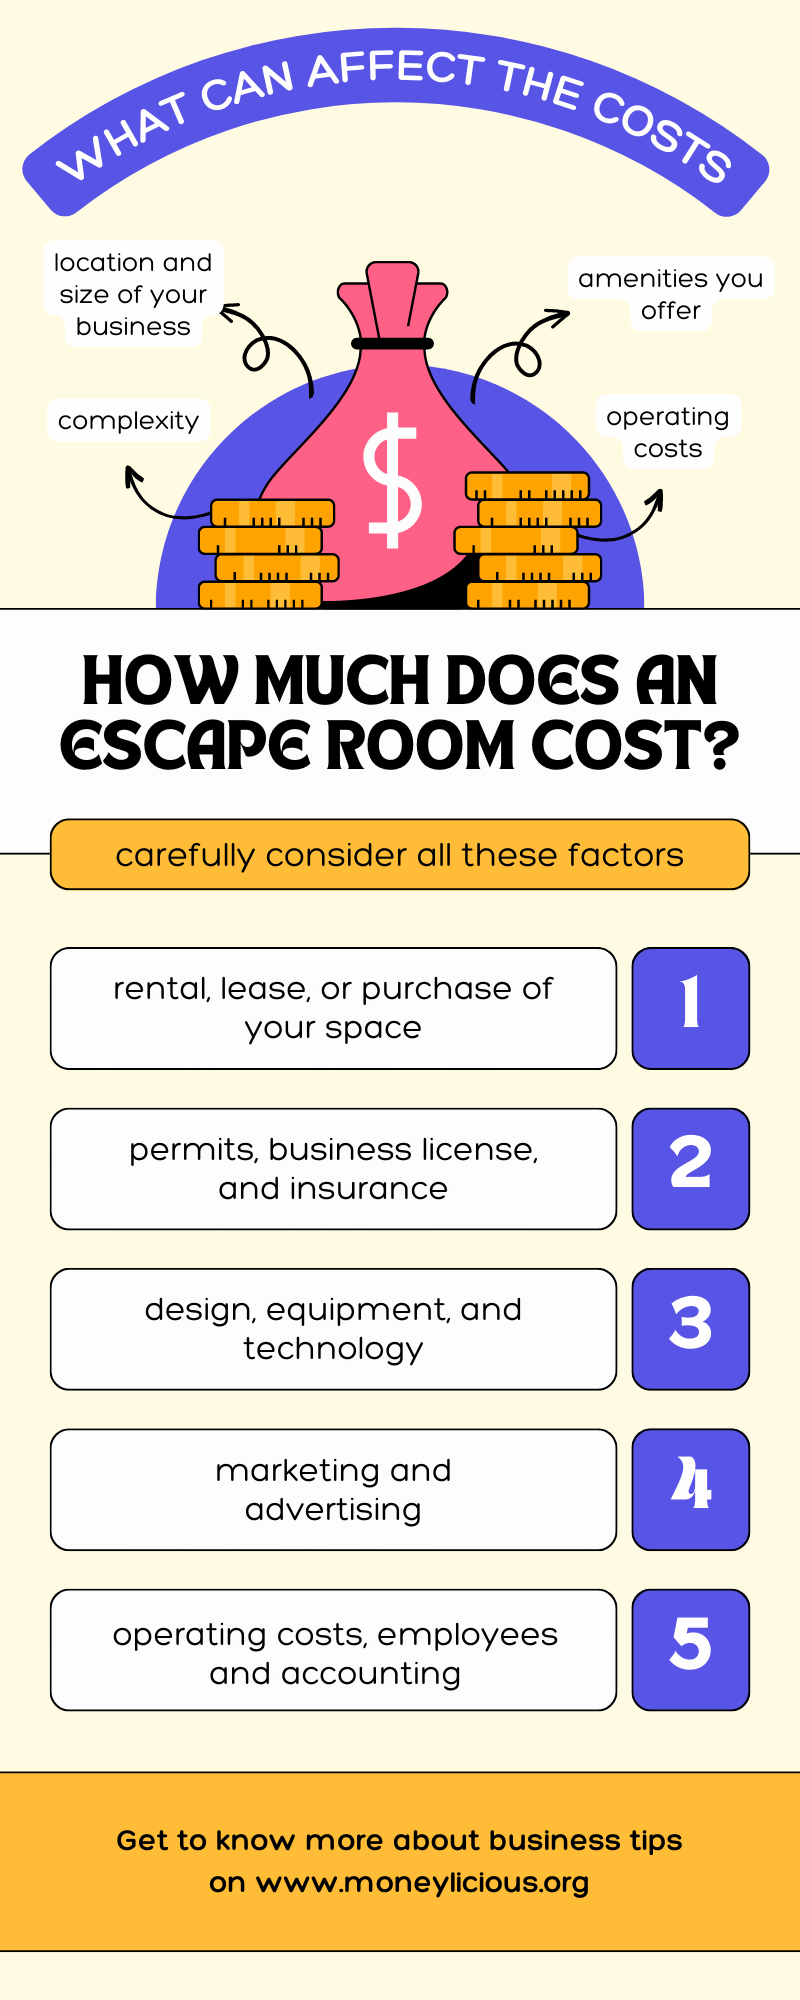 what can affect the cost of opening an escape room business